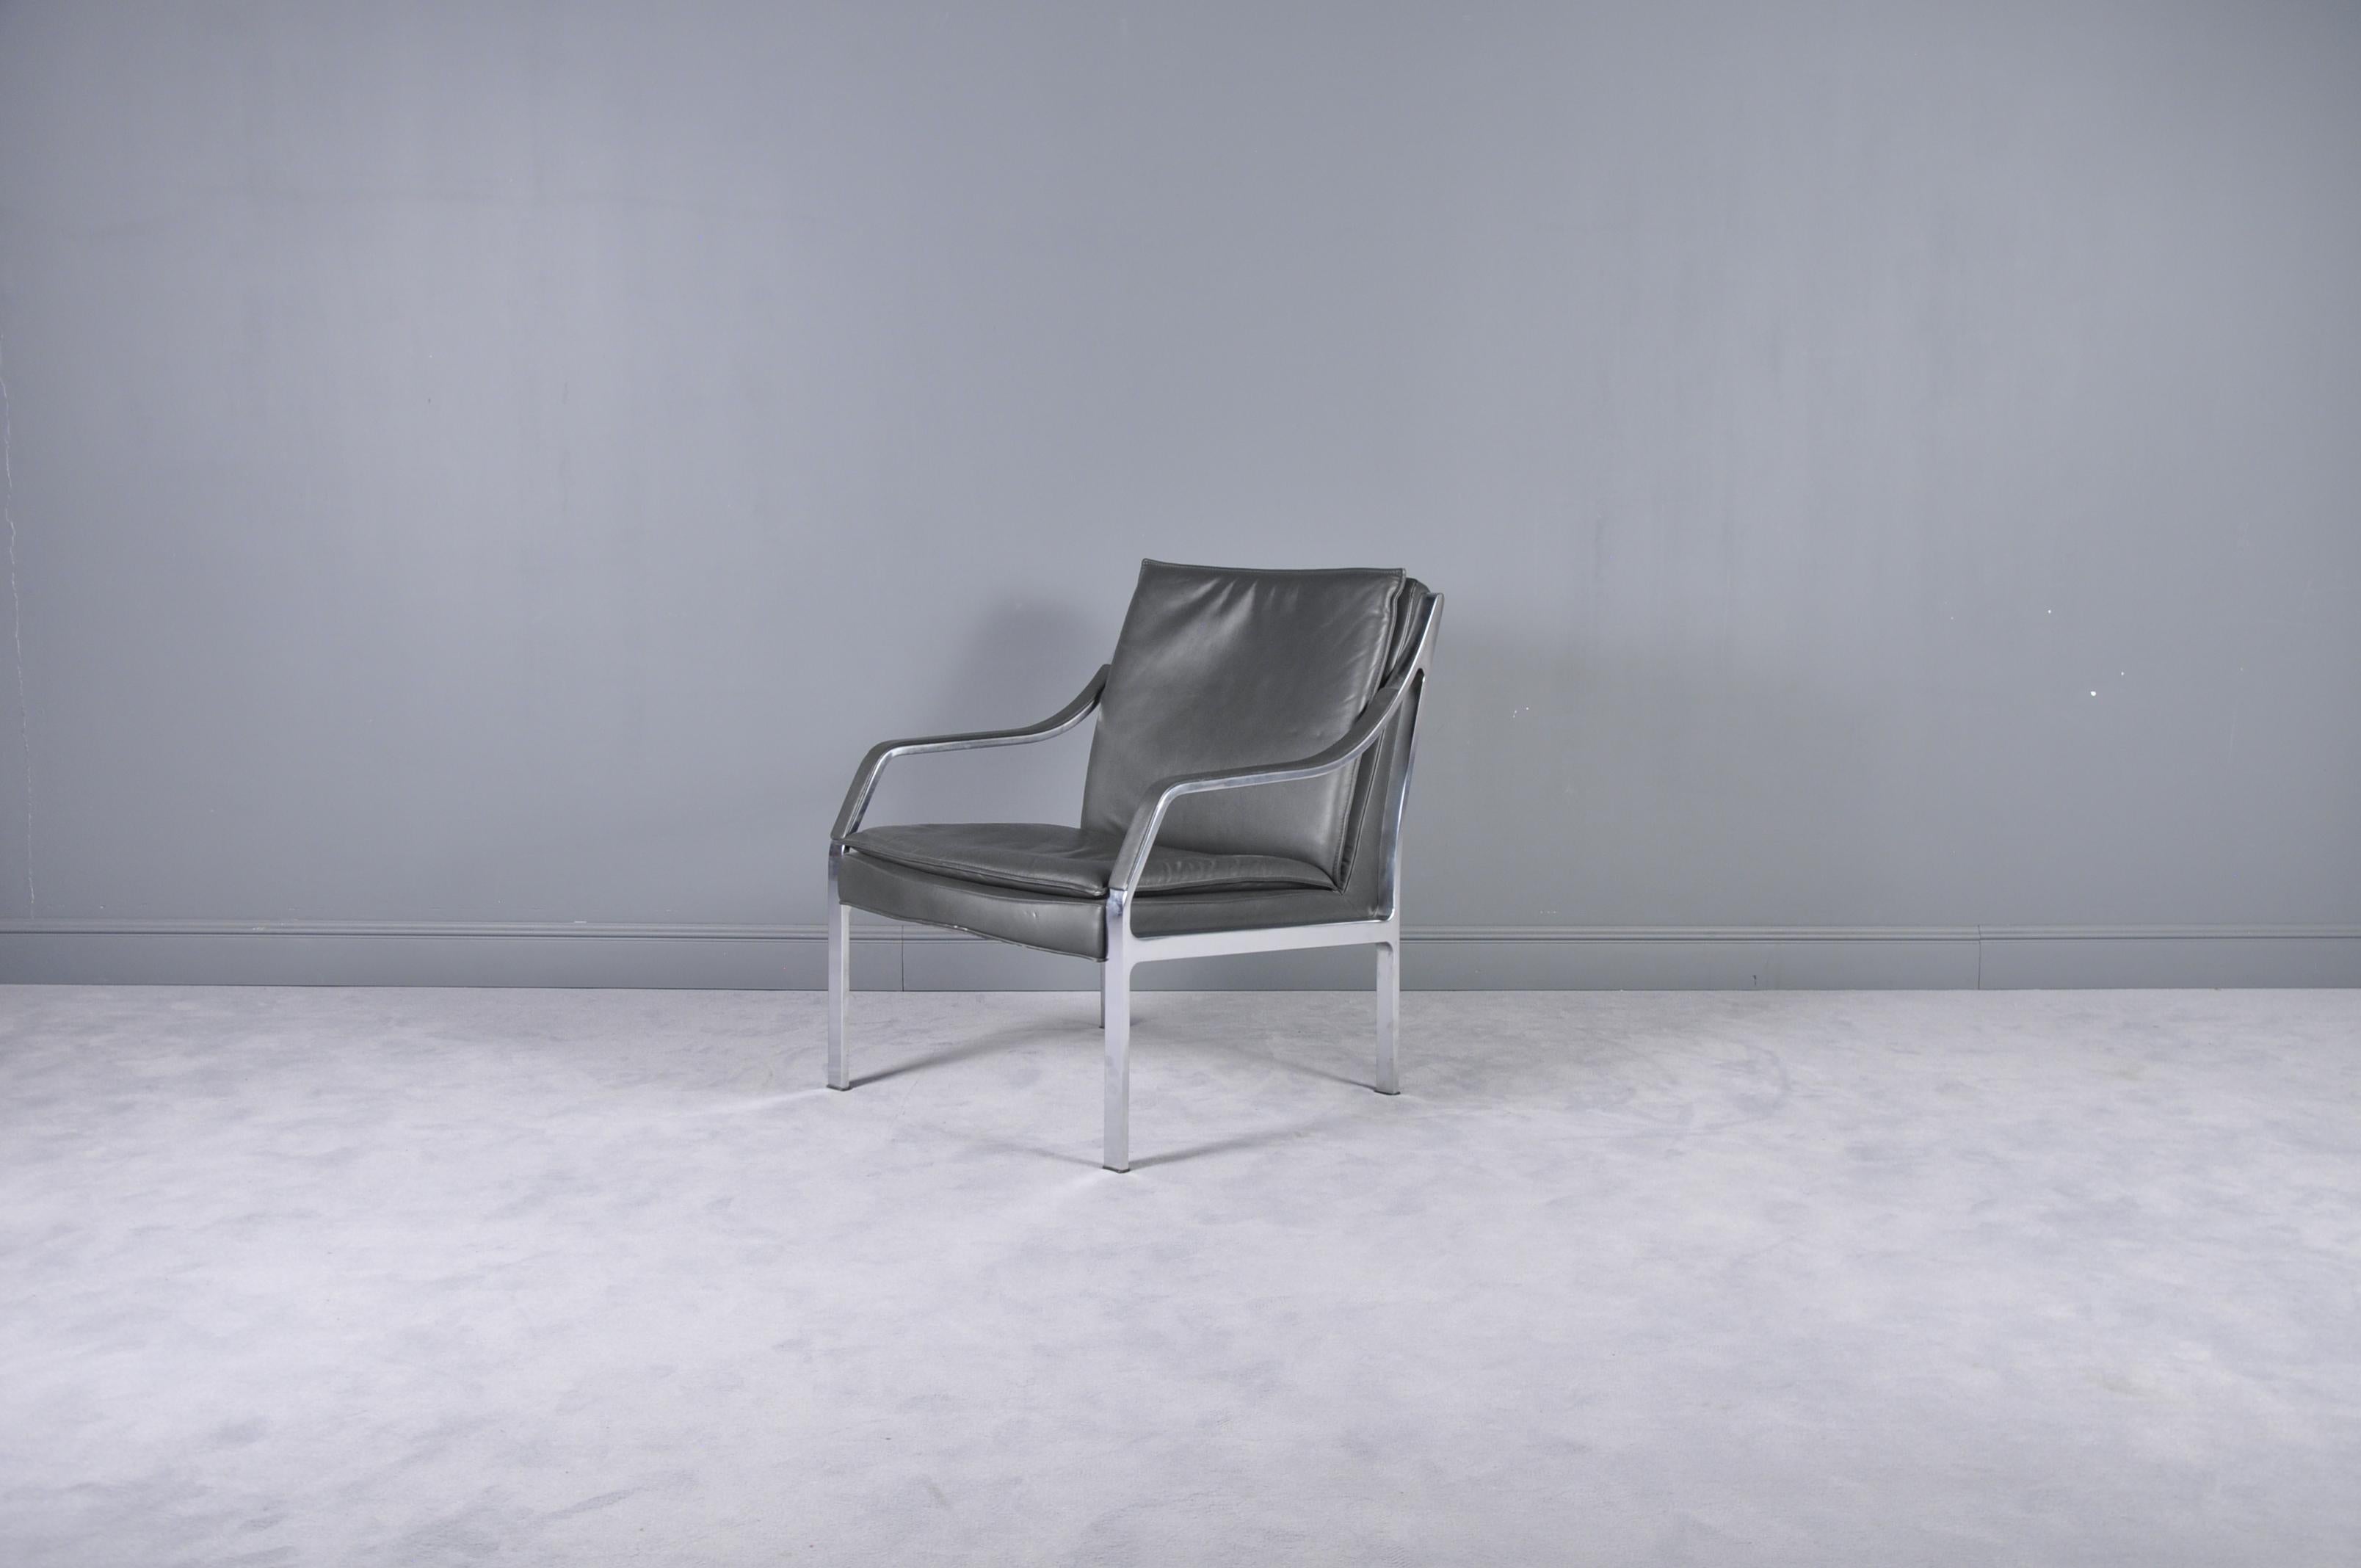 The art collection chair is a comfortable design Classic with a heavy brushed stainless steel frame and grey leather upholstery. This cantilever chair was designed by Rudolf Bernd Glatzel in the 1980s for Walter Knoll as part of the art